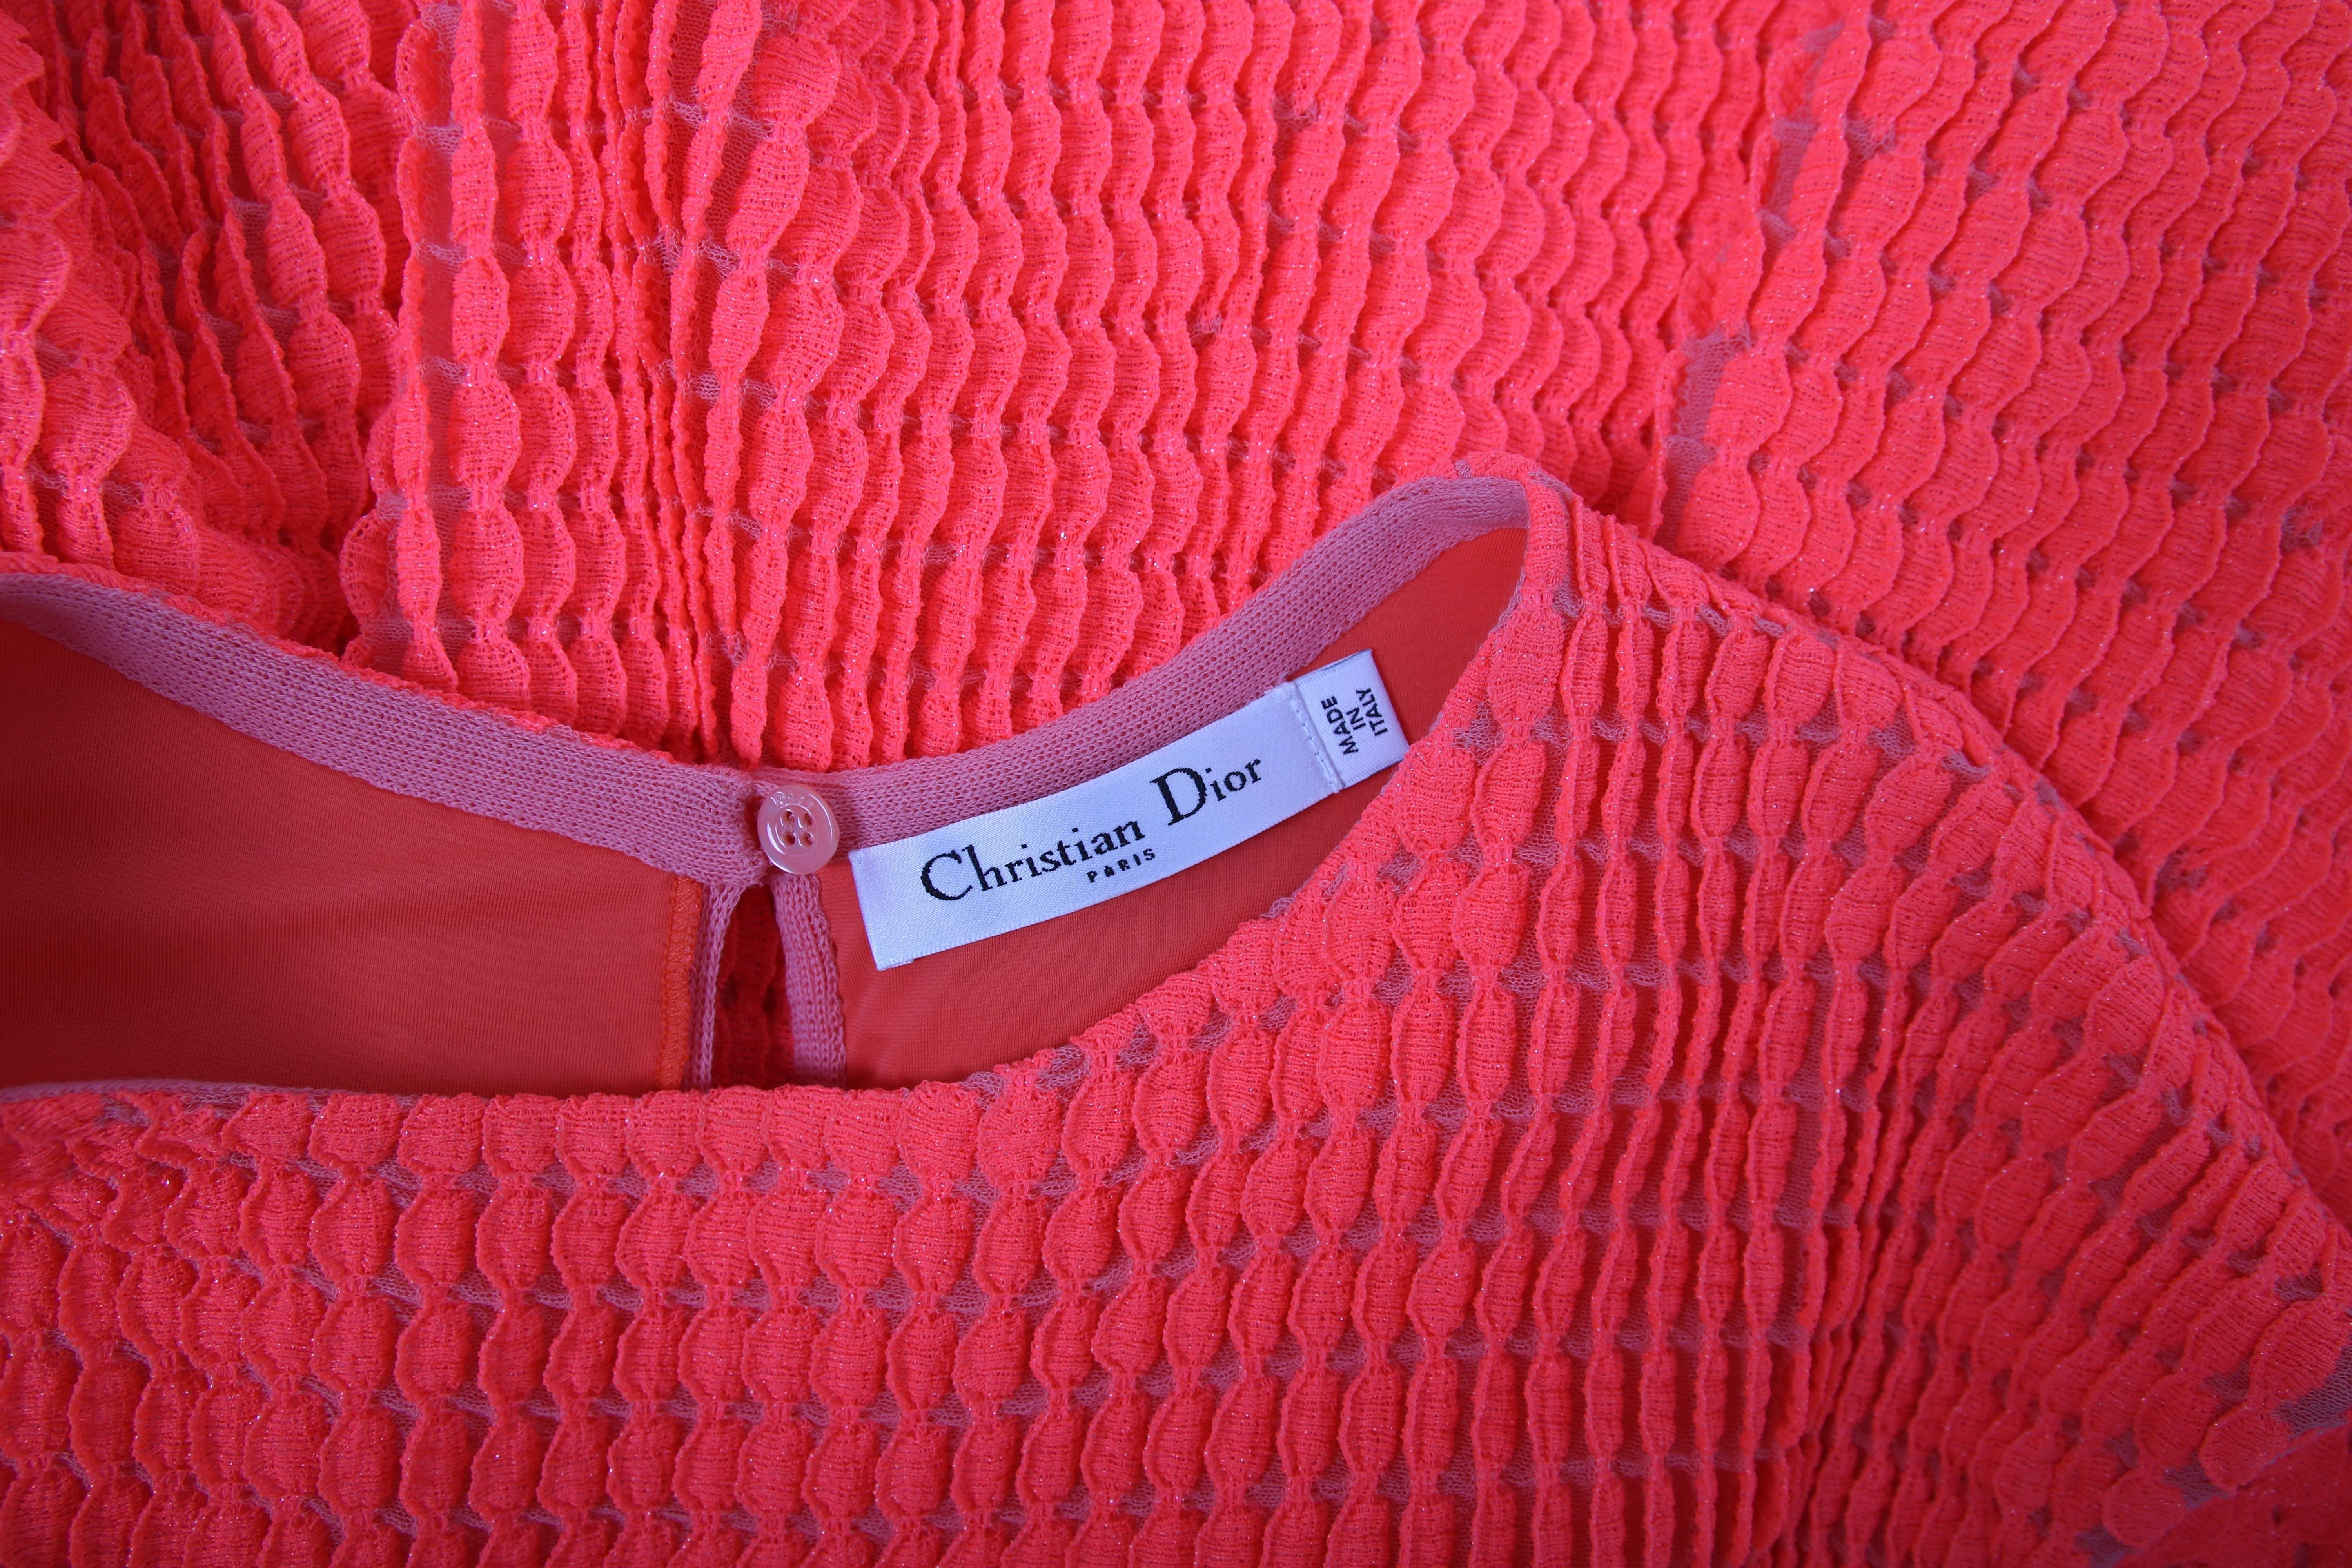 2013 Christian Dior by Raf Simons Neon Pink Textured Stretch Cocktail Day Dress 4